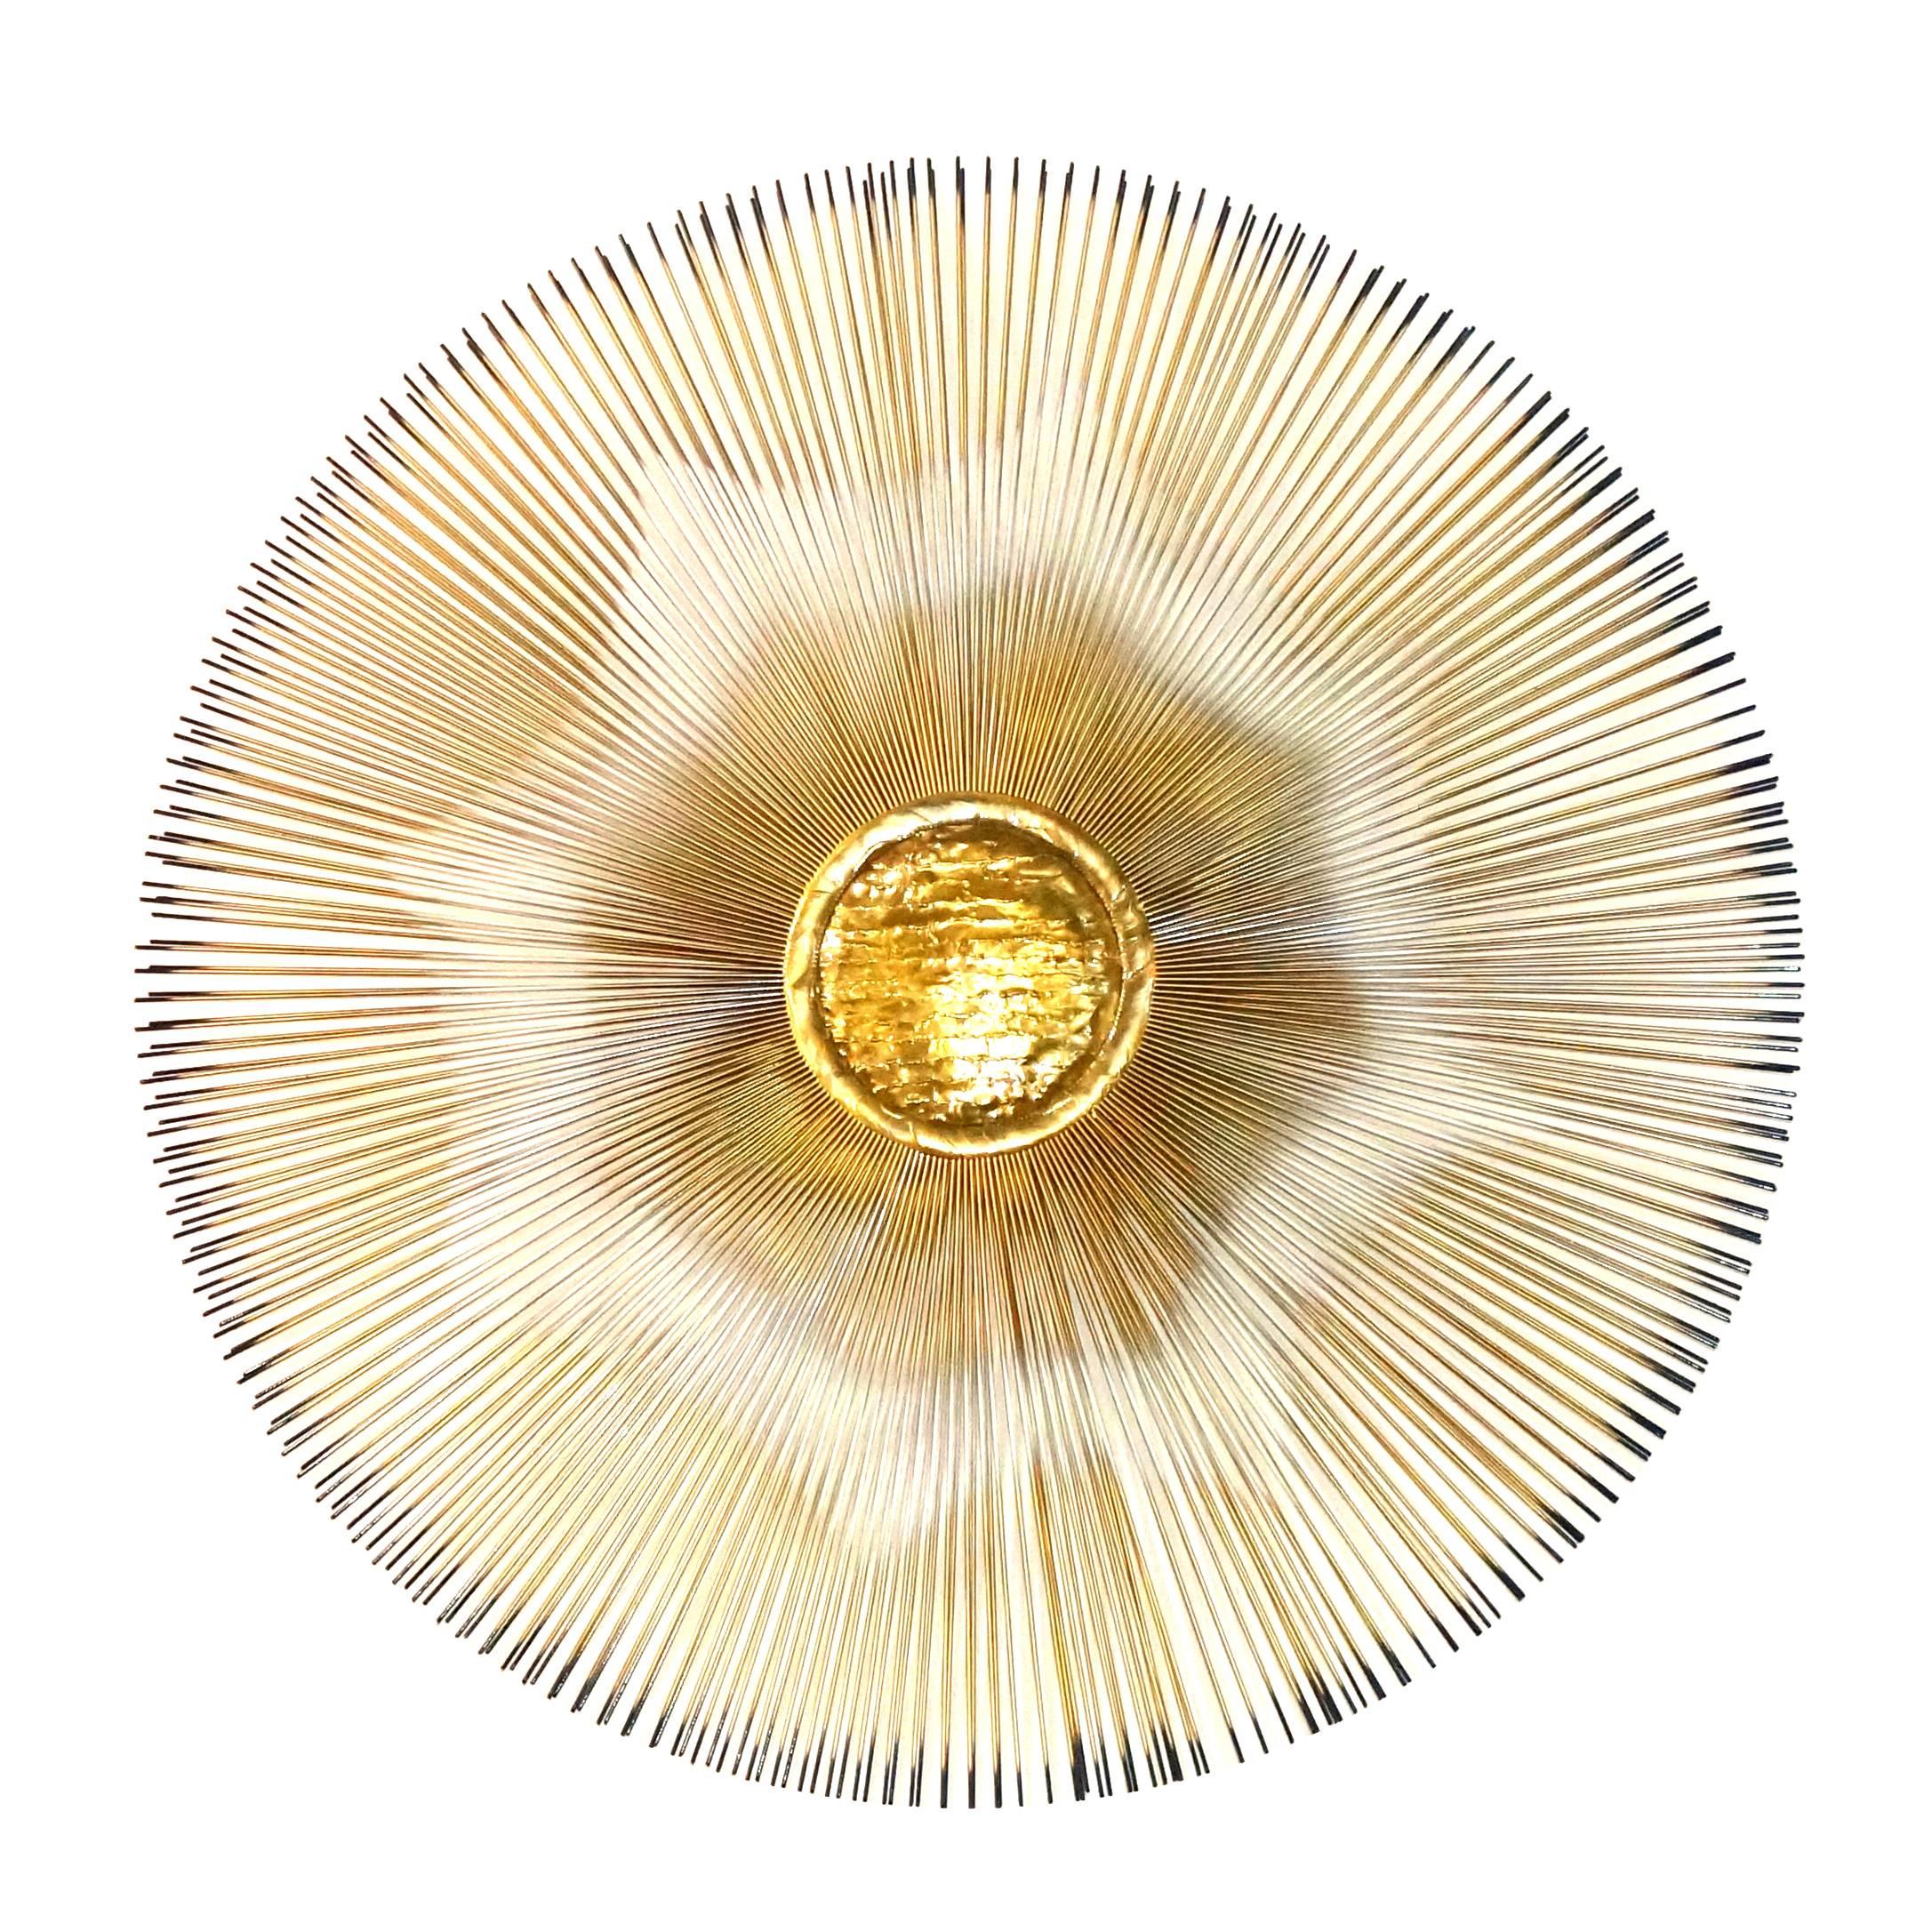 Curtis Jere Wall-Mount Sunburst Sculpture in Burnished Gold, Brass and Copper